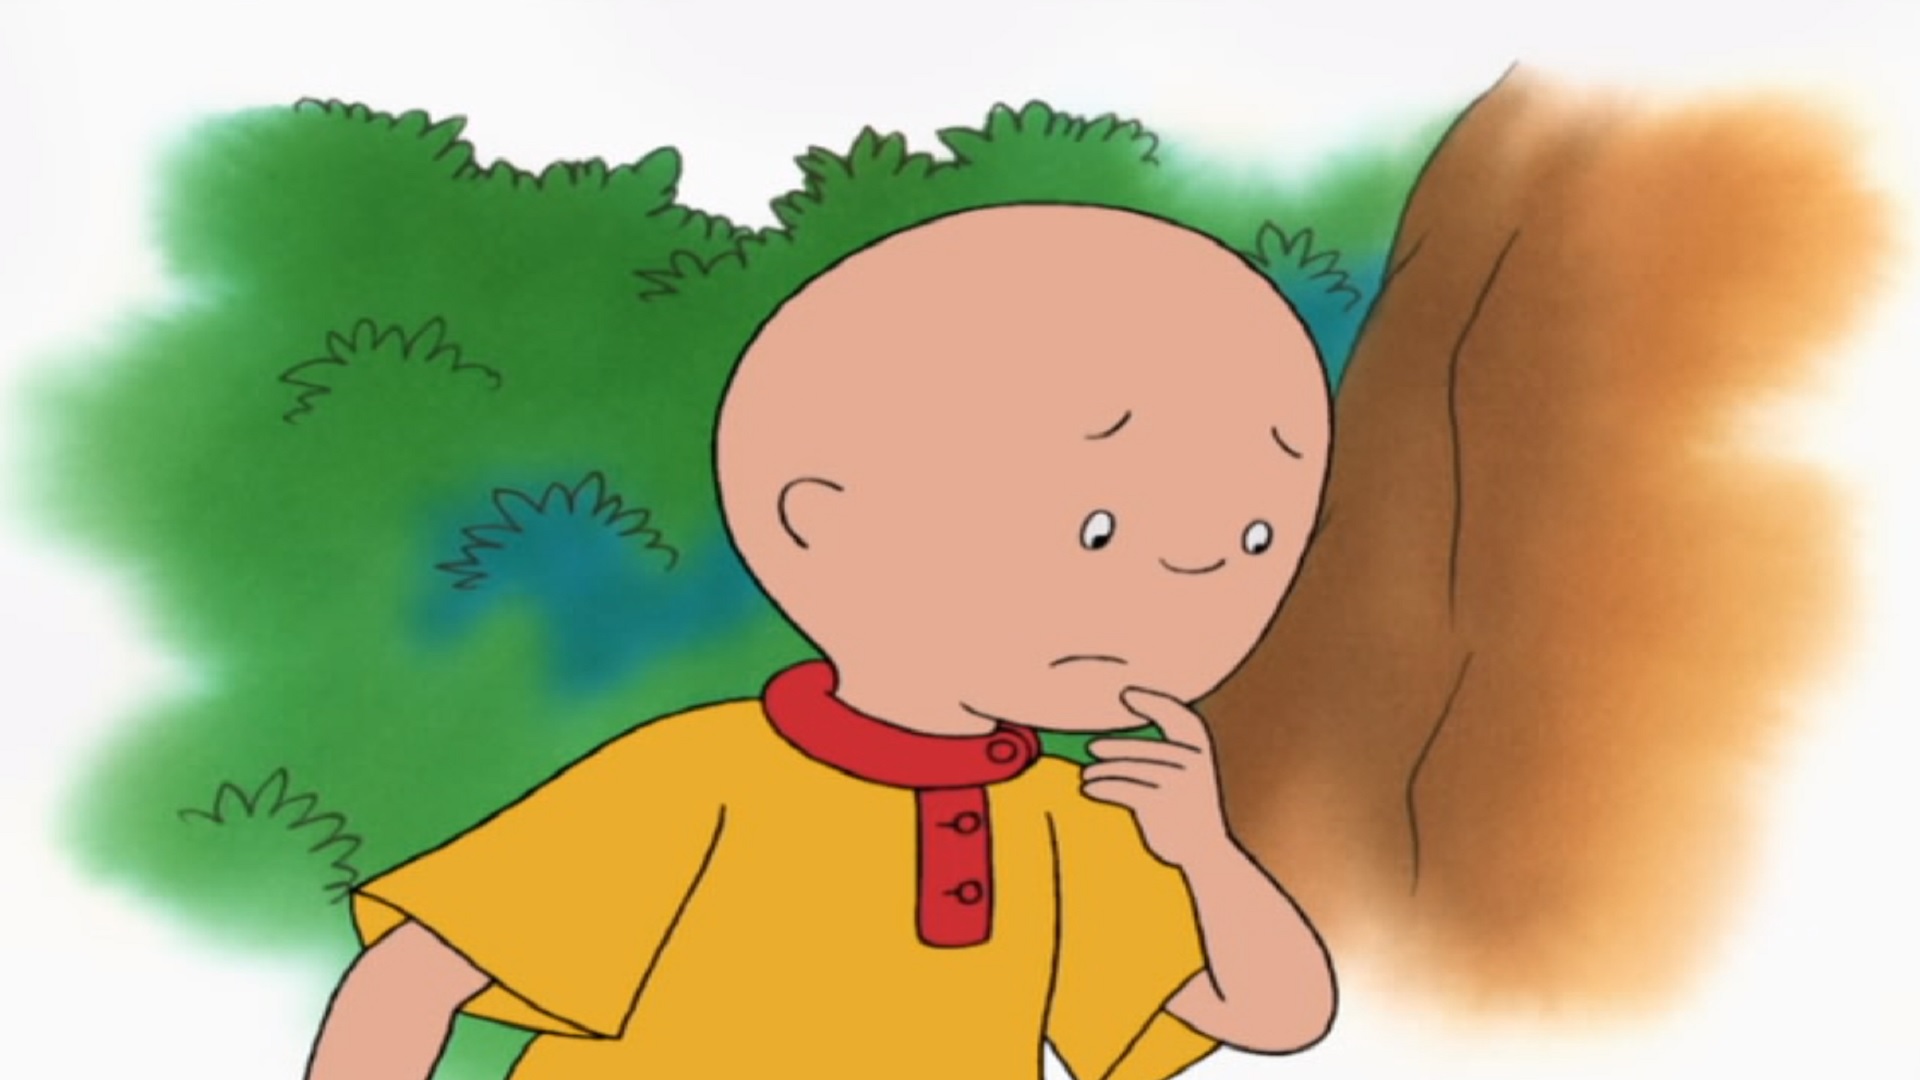 Caillou nightmare